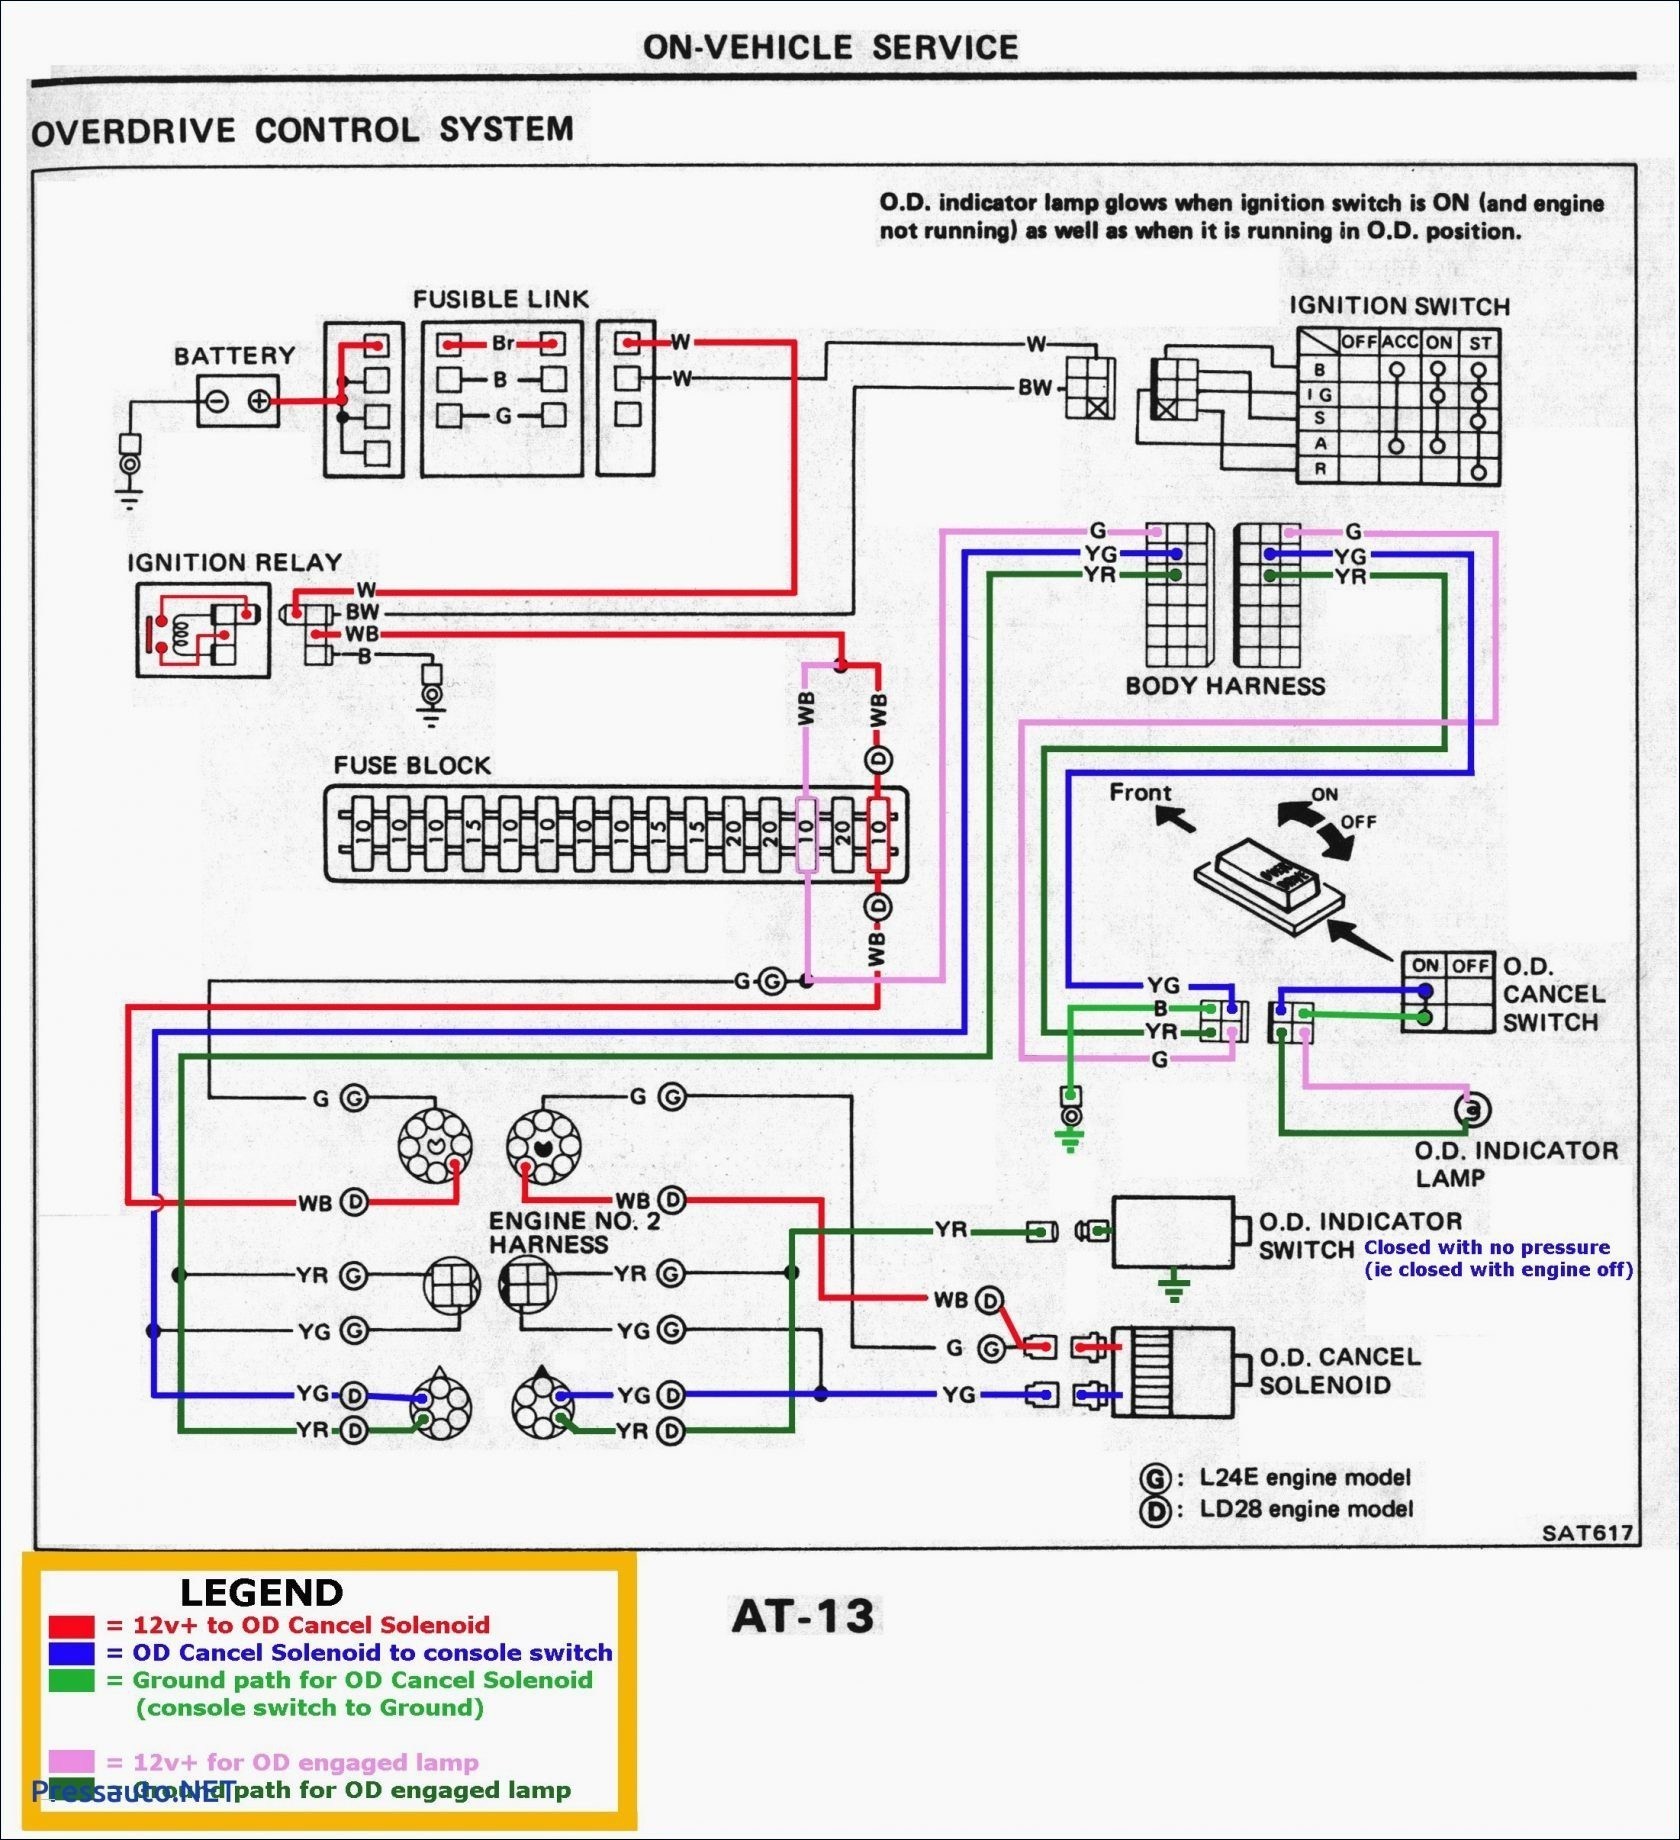 Wiring Diagram In Parallel New Wiring Diagram for Lights In Parallel Valid Wire Diagram Download